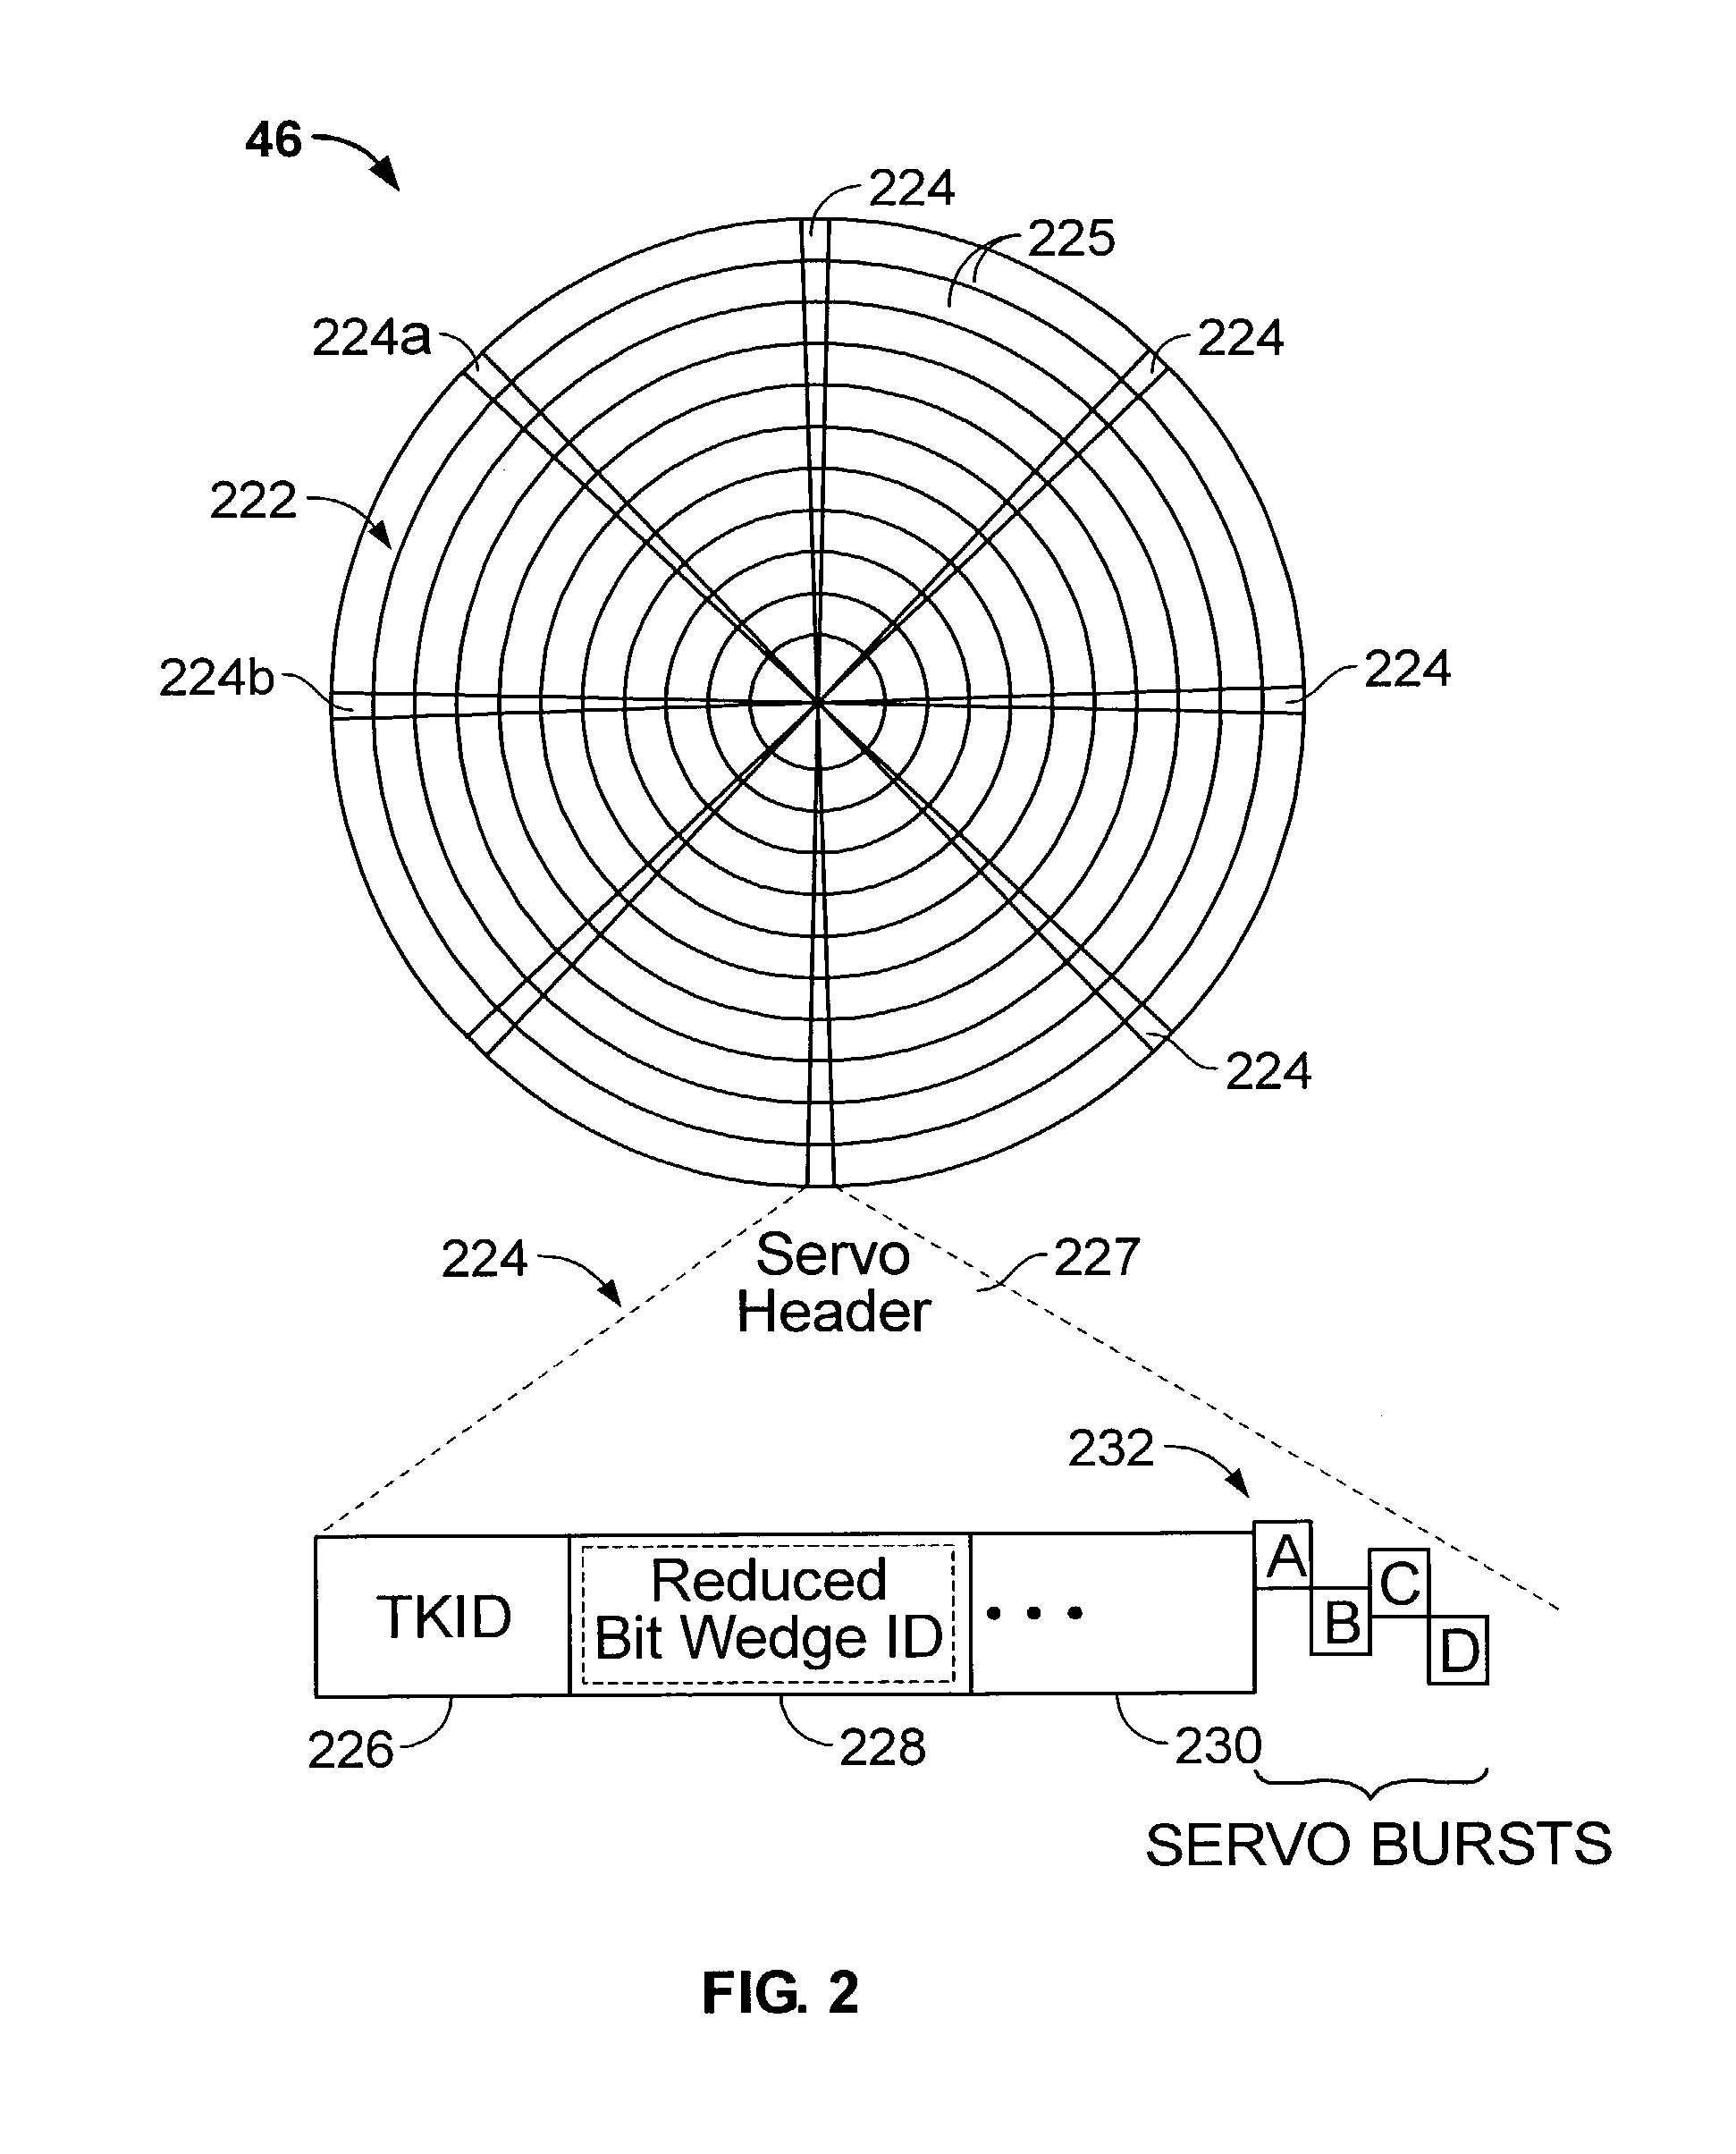 Reduced bit number wedge identification techniques within a rotating media storage device